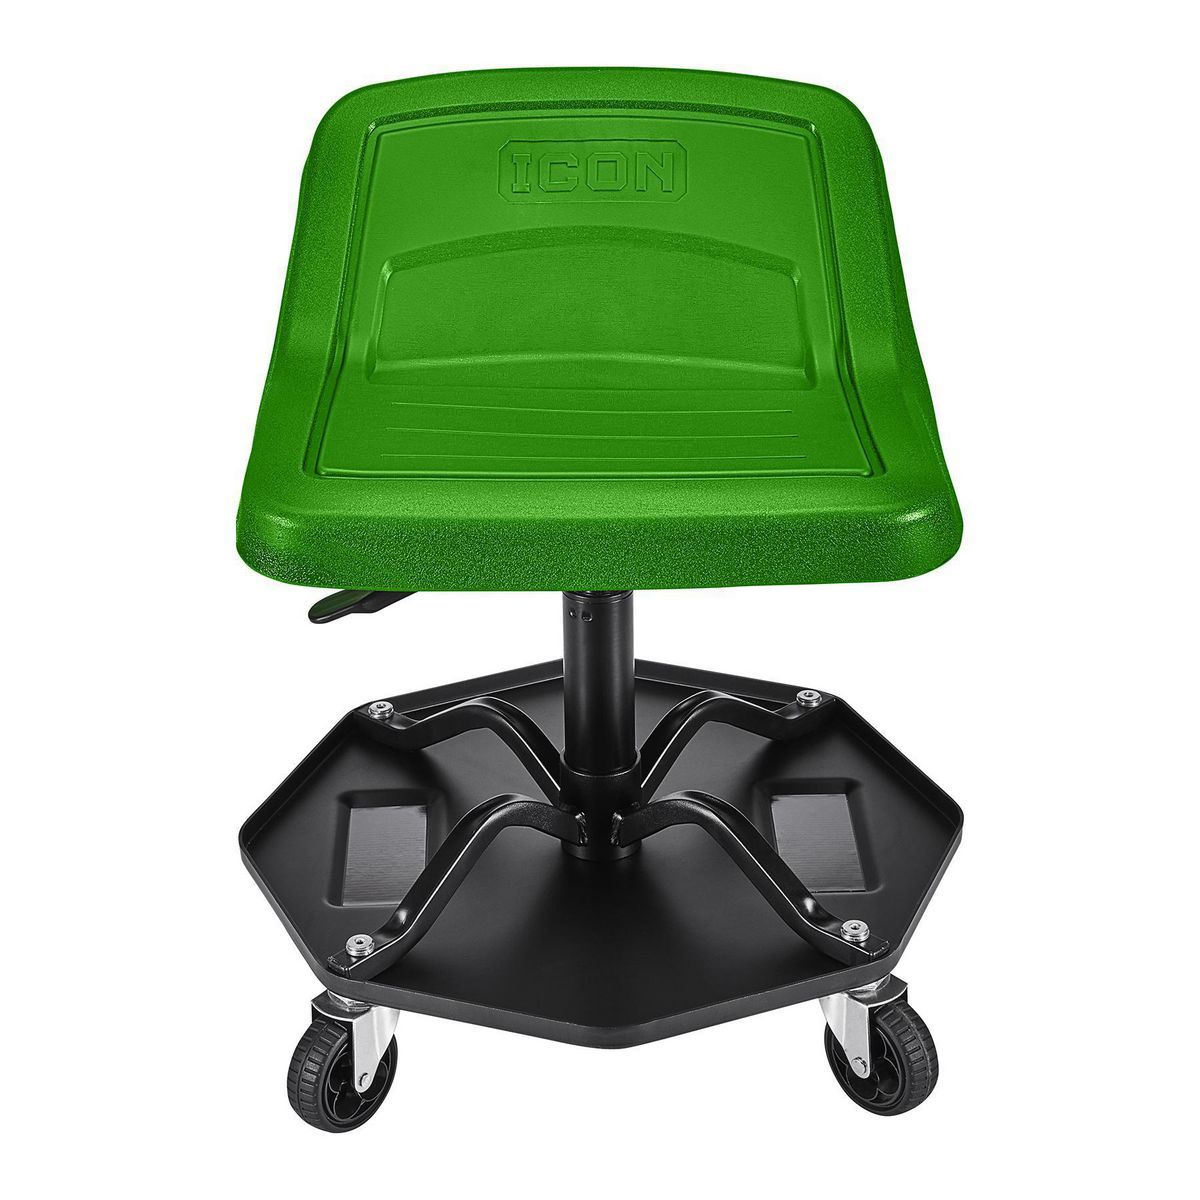 Professional Adjustable Shop Seat with Tool Storage, Green